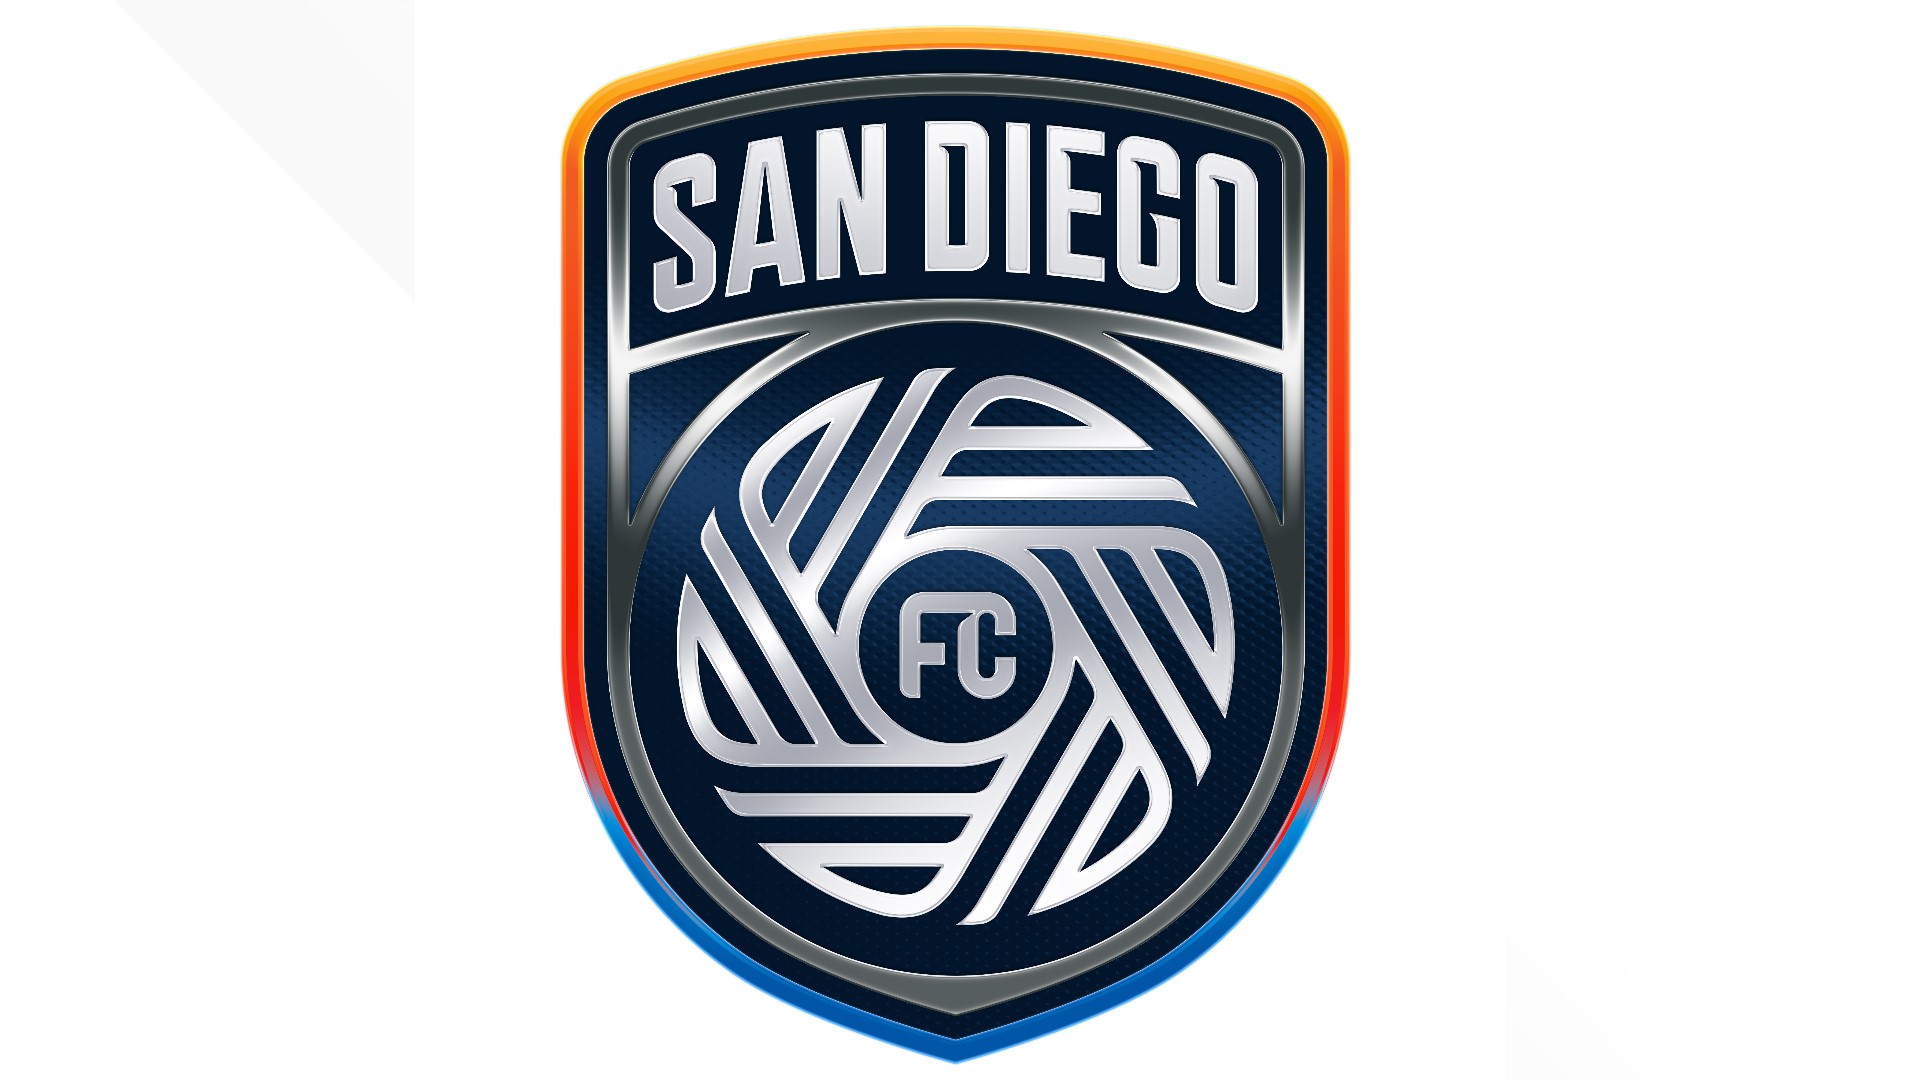 The city's new Major League Soccer team, the 30th in the league, has revealed the club’s name, crest and colors.